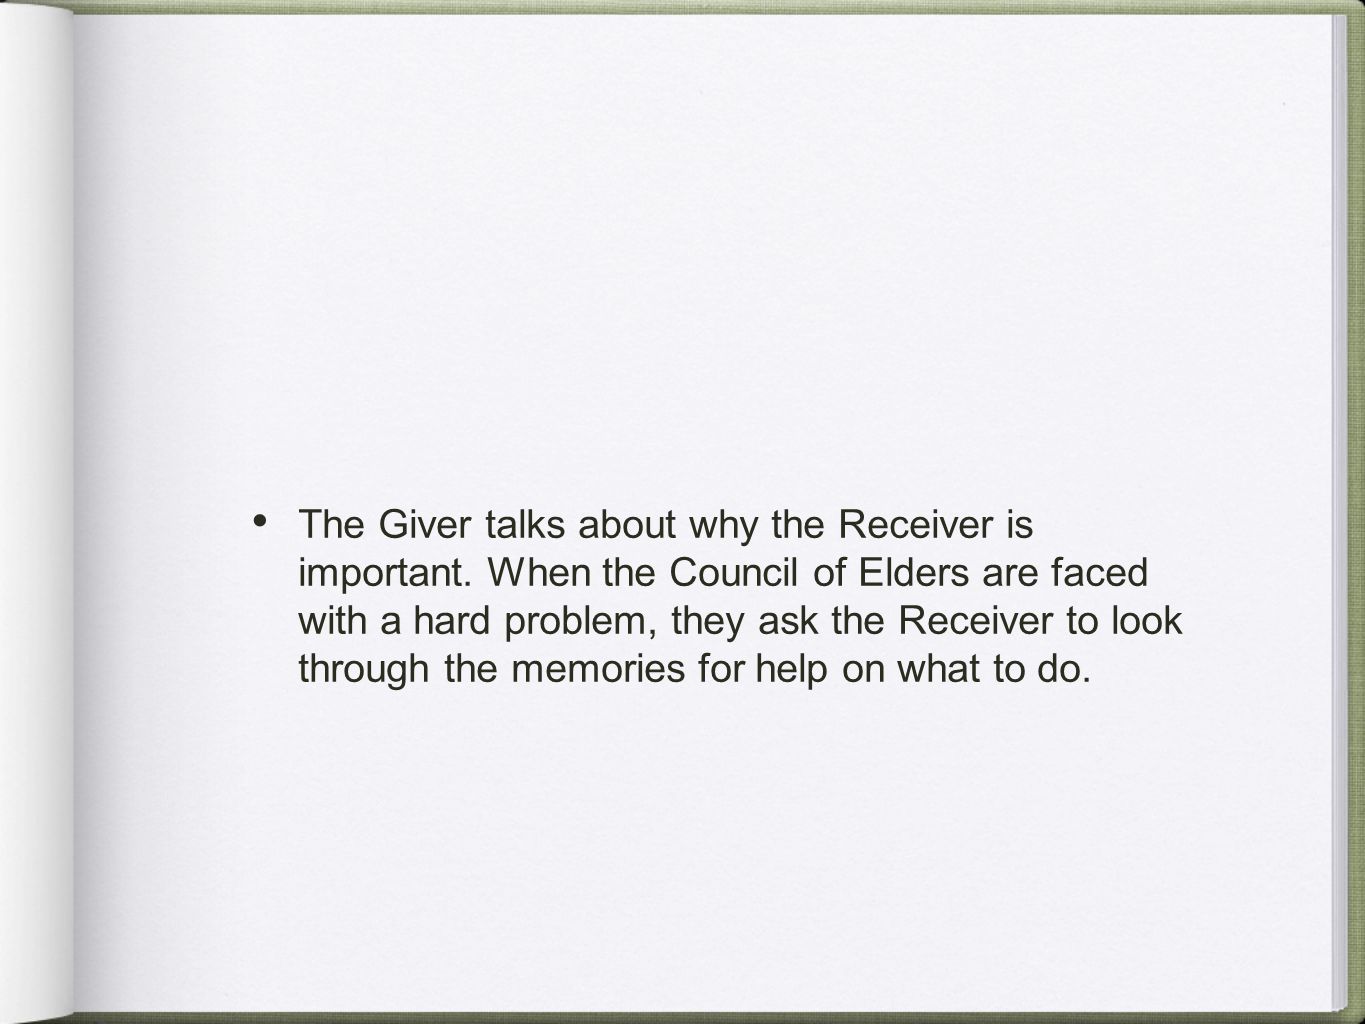 The Giver talks about why the Receiver is important.